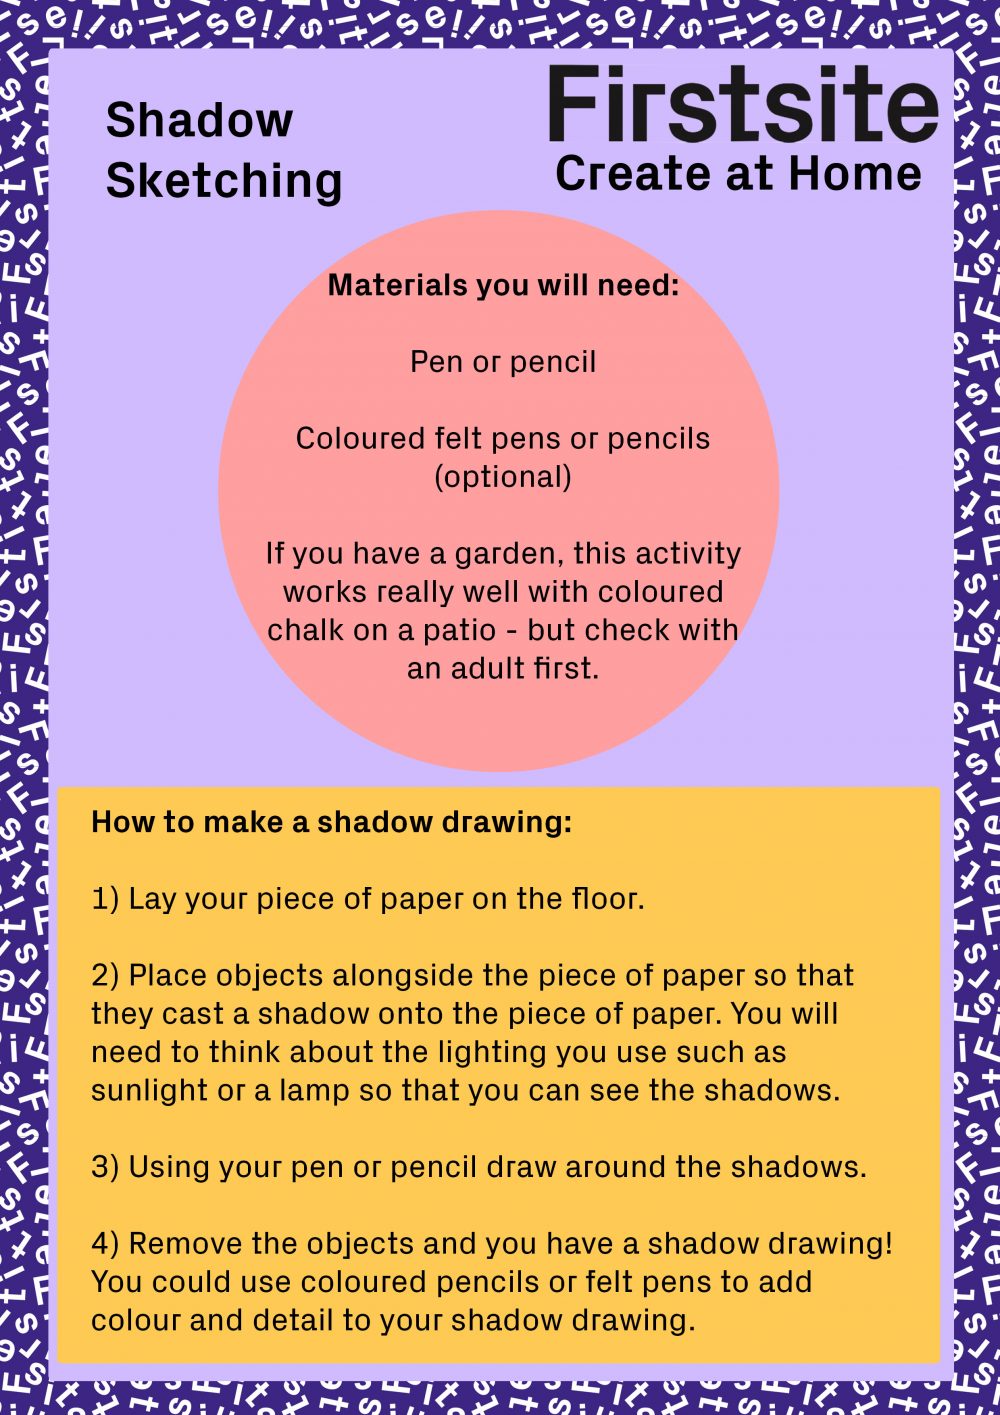 Firstsite Create at Home Shadow Sketching instructions page 1 of 1